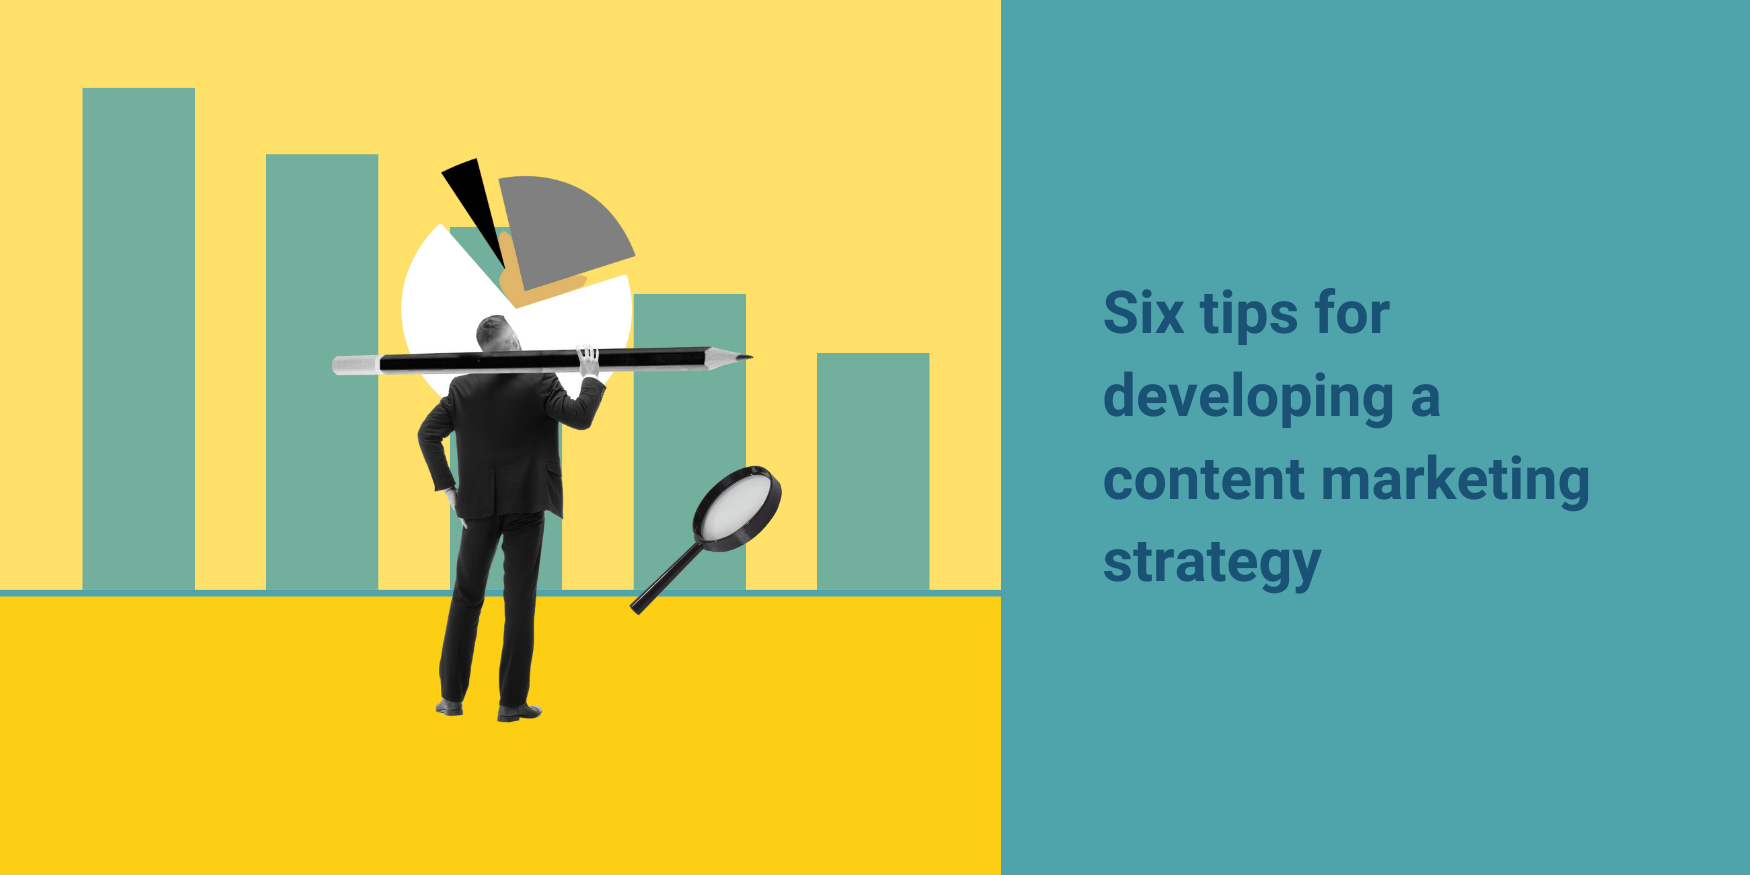 Six tips for developing a content marketing strategy